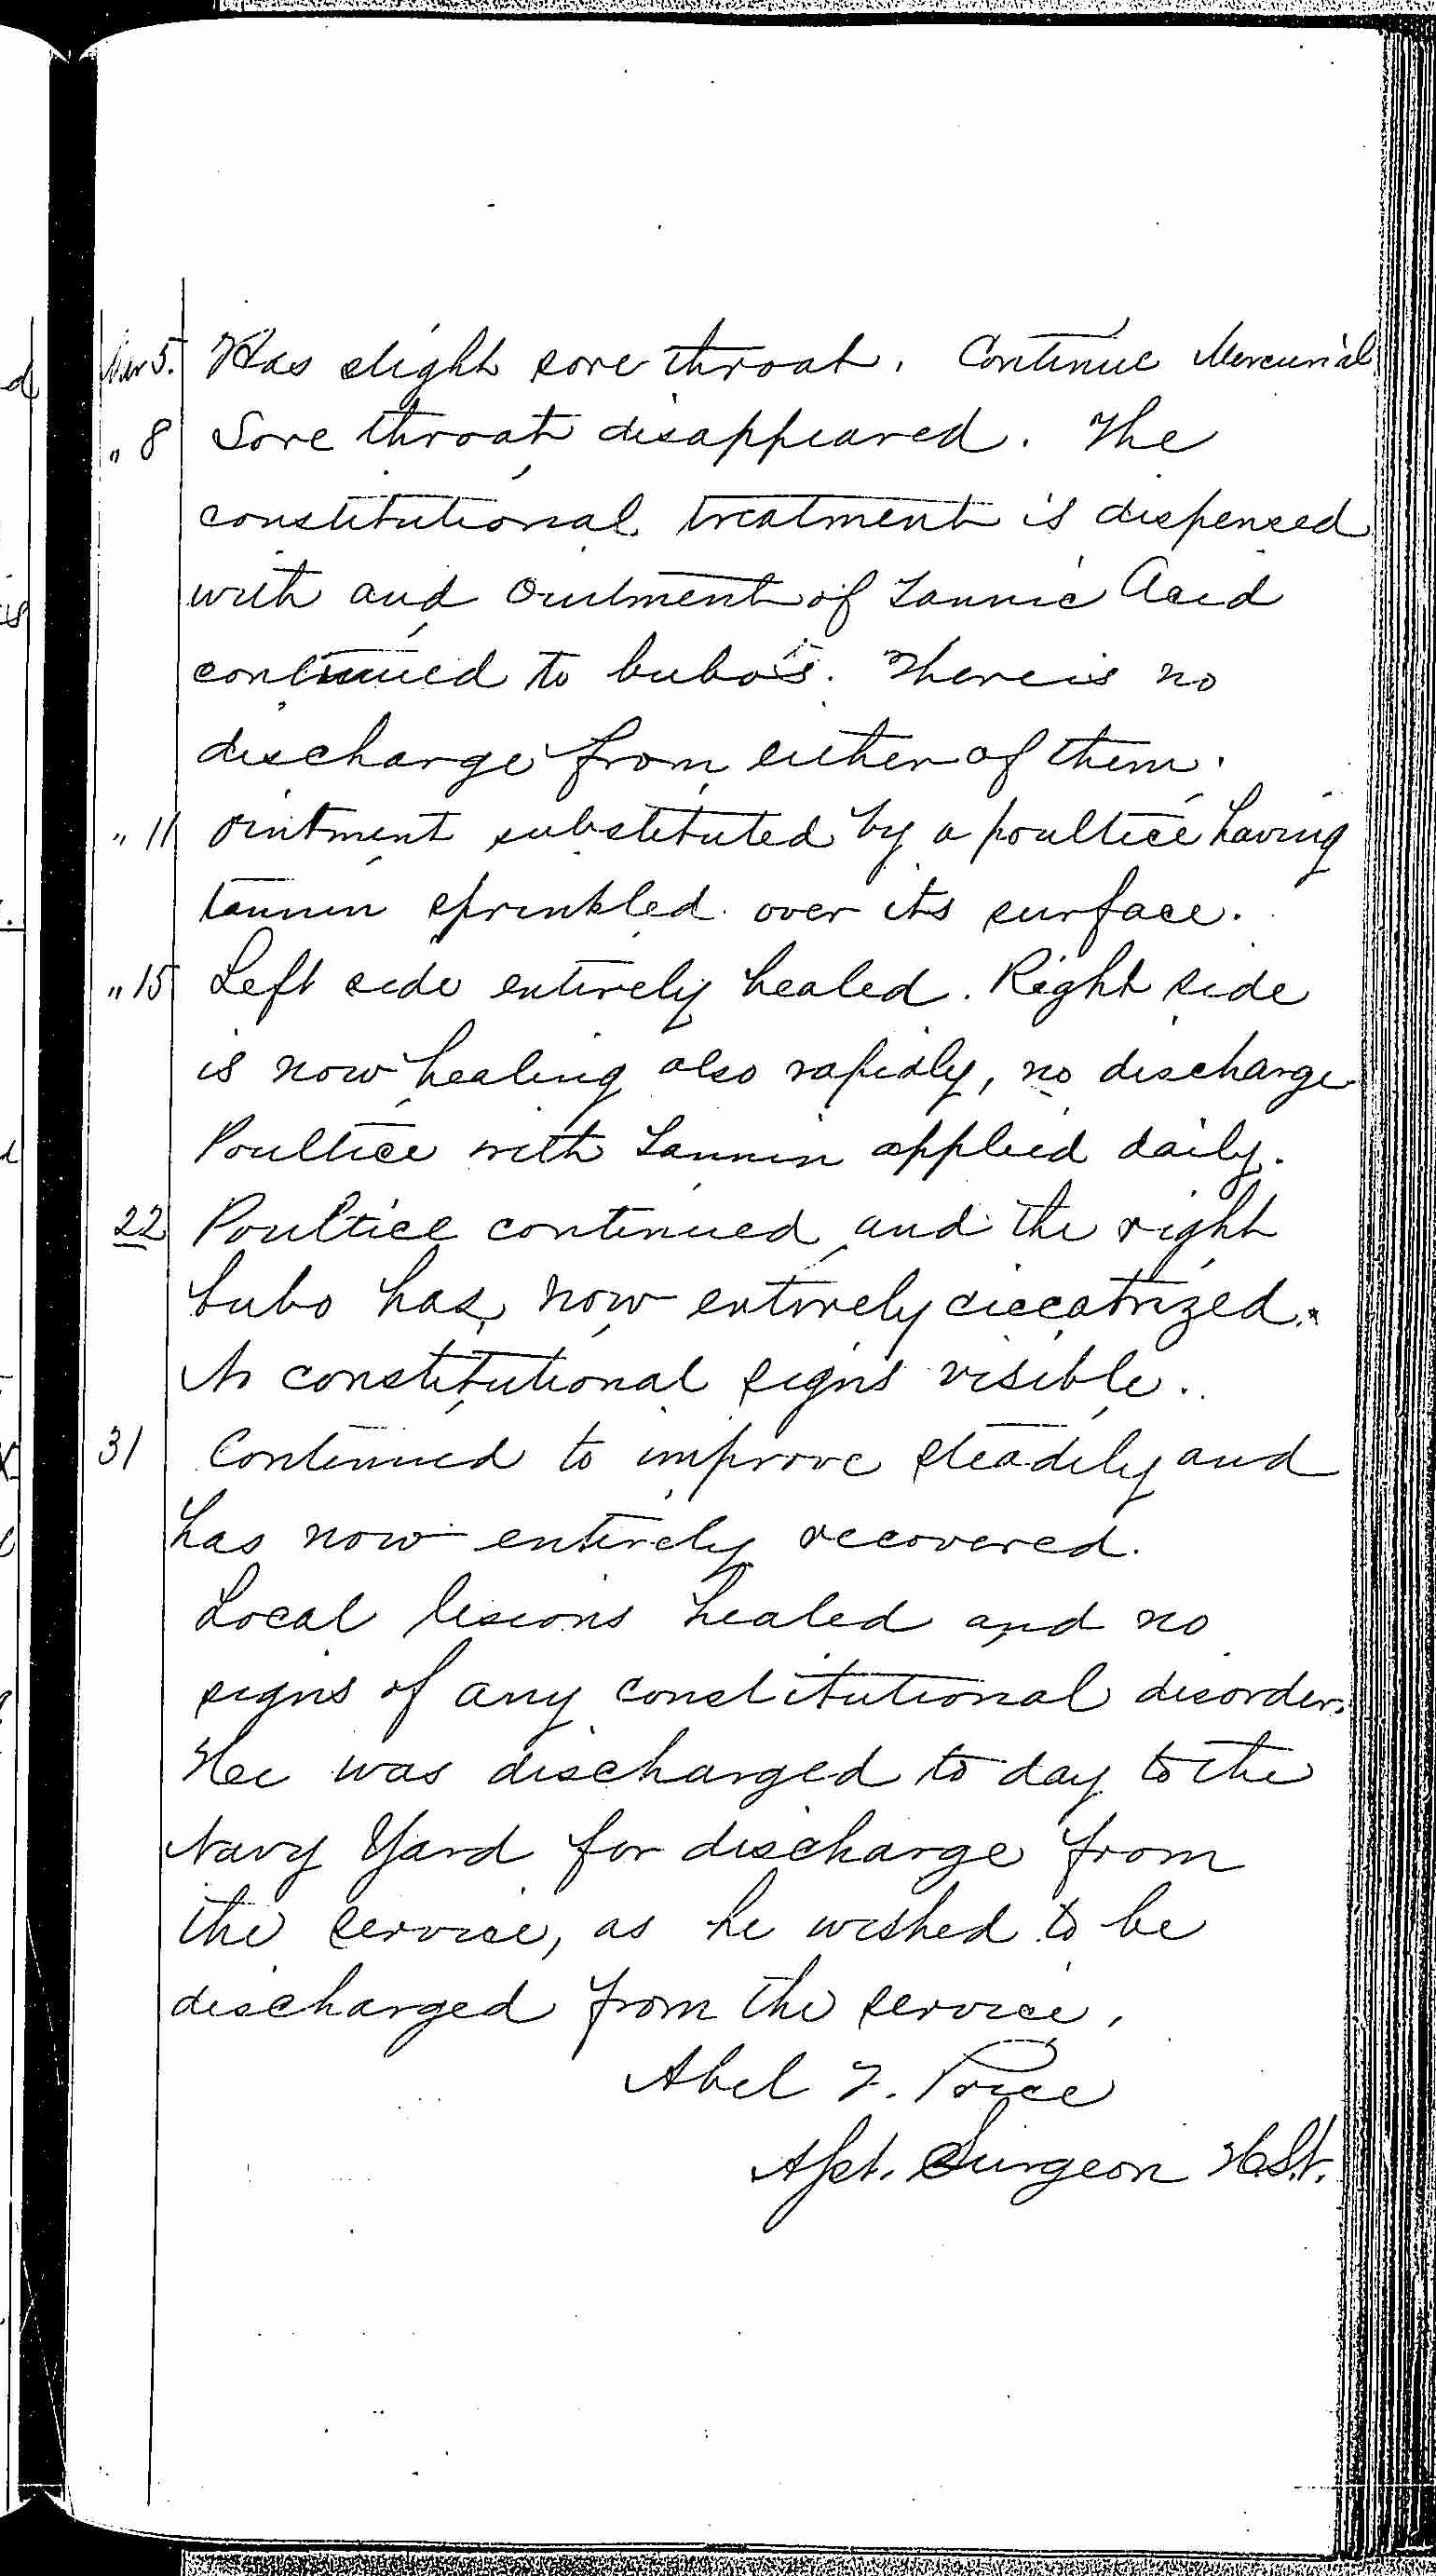 Entry for Lorenzo Parker (page 3 of 3) in the log Hospital Tickets and Case Papers - Naval Hospital - Washington, D.C. - 1868-69